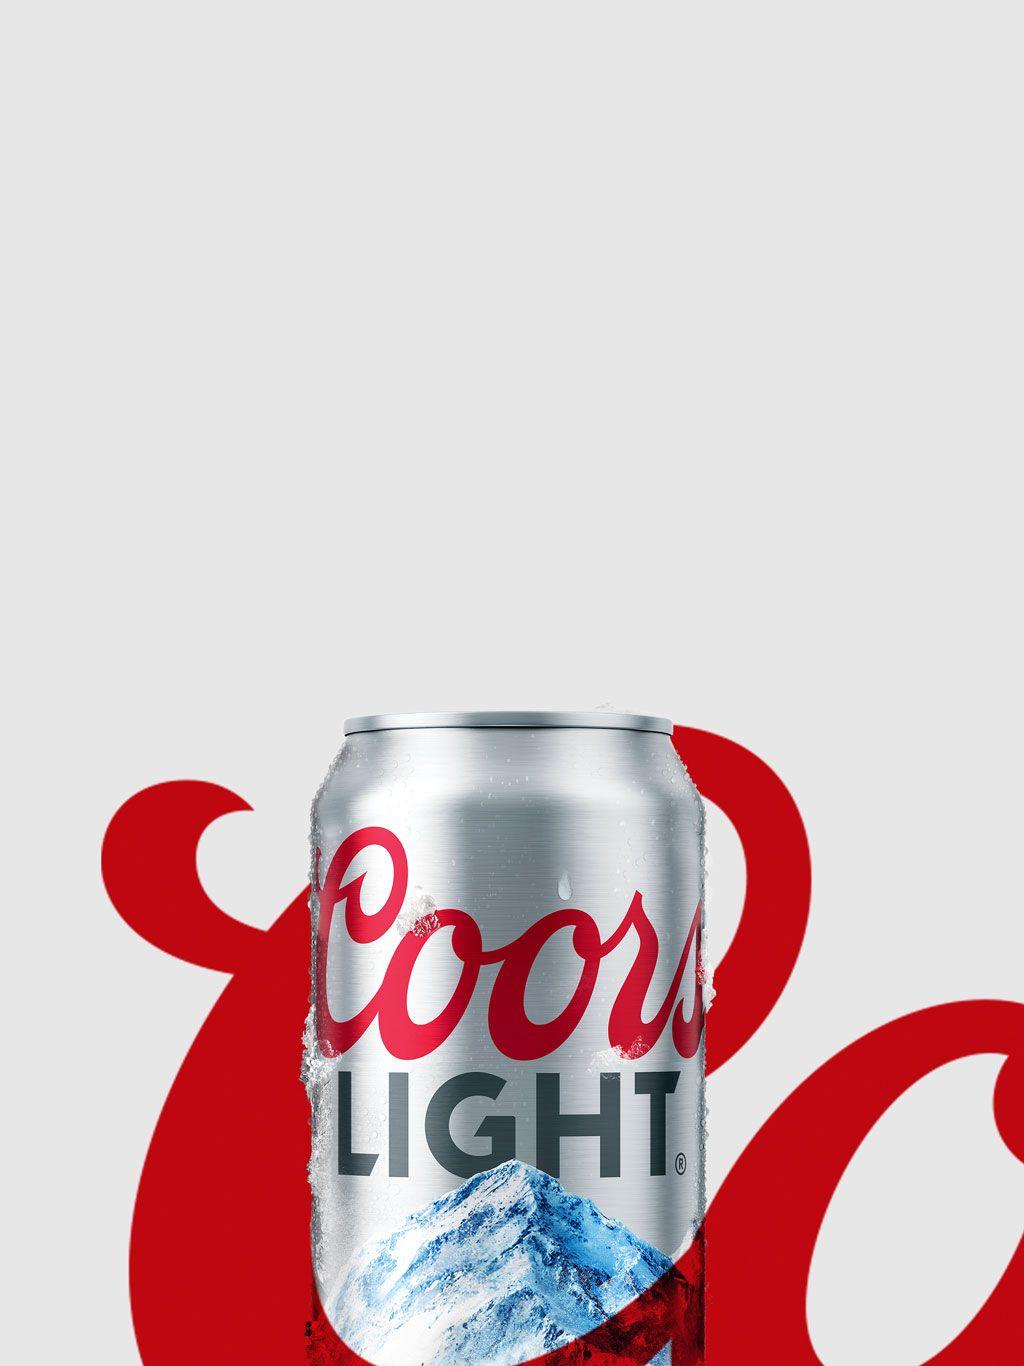 Coors Can Logo - Light Beer Born In The Rockies 1978 | Coors Light